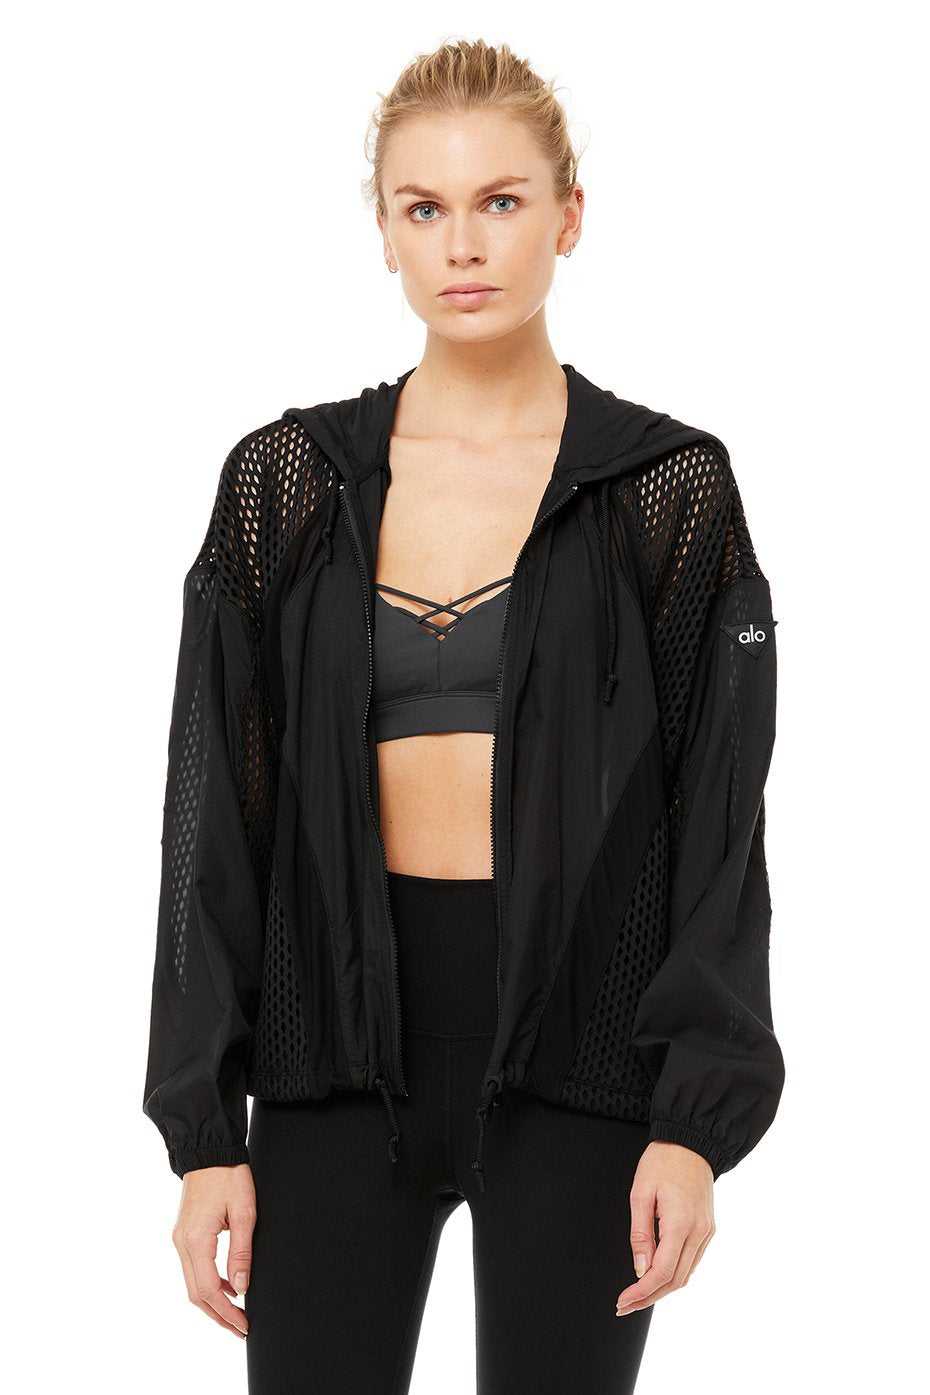 Feature Jacket in Black by Alo Yoga | Ballet for Women